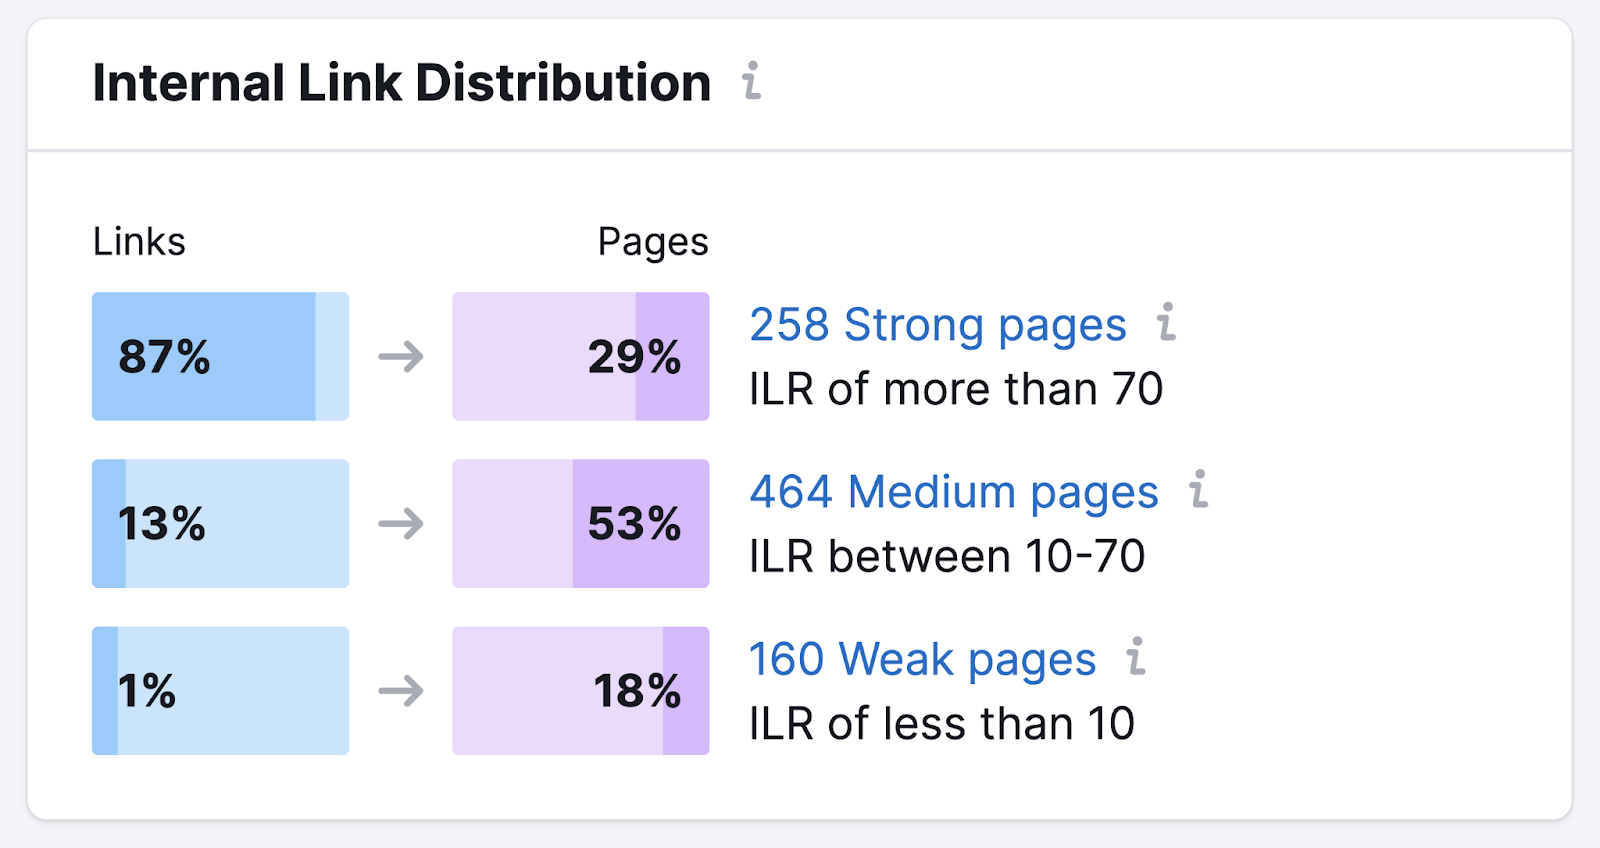 internal link distribution chart with percentage of links going to a percentage of pages.